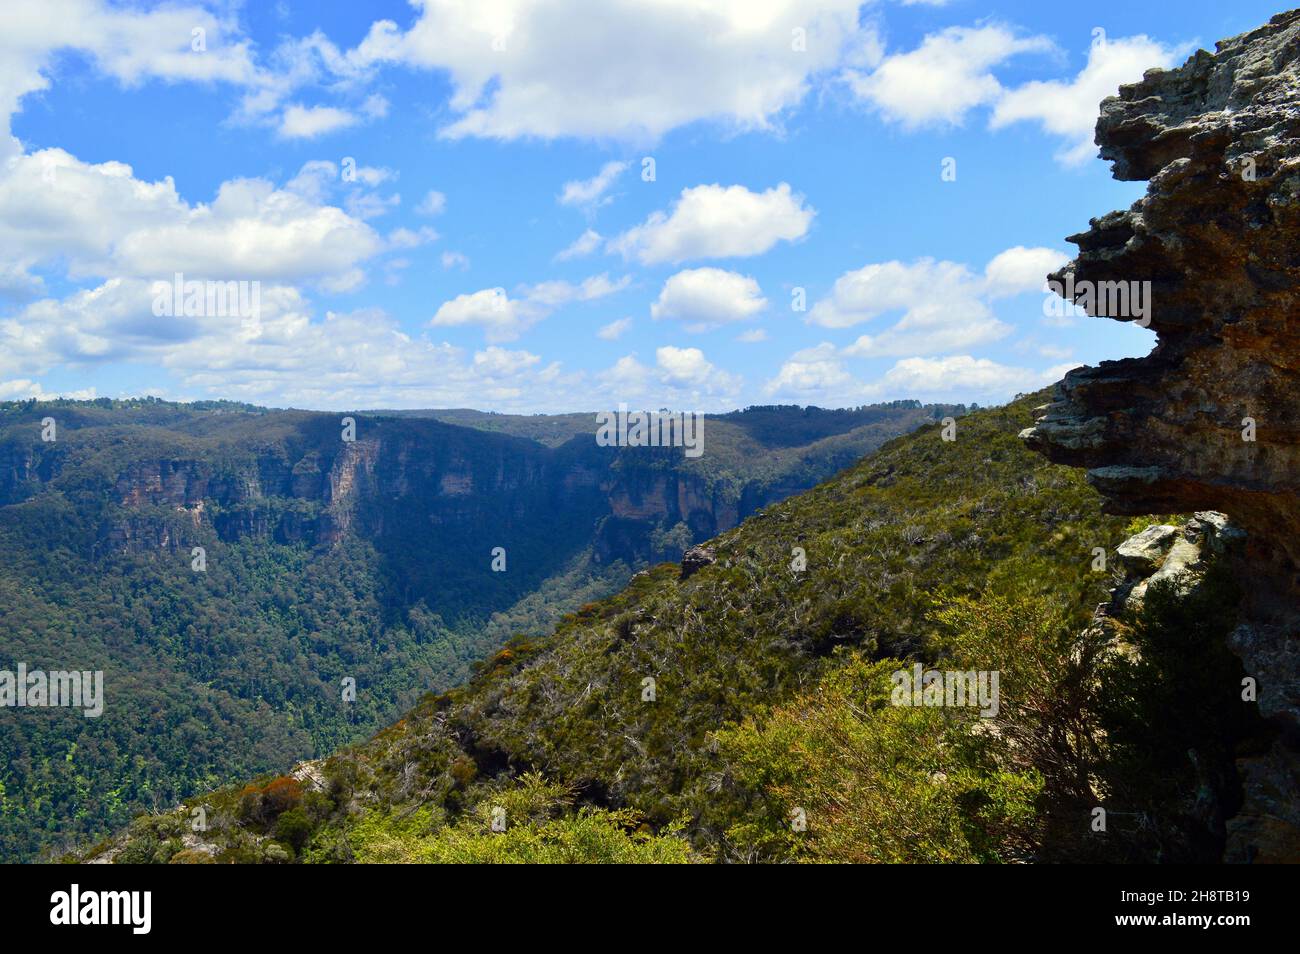 A view of the Jamison Valley from Lincolns Rock in the Blue Mountains of Australia Stock Photo